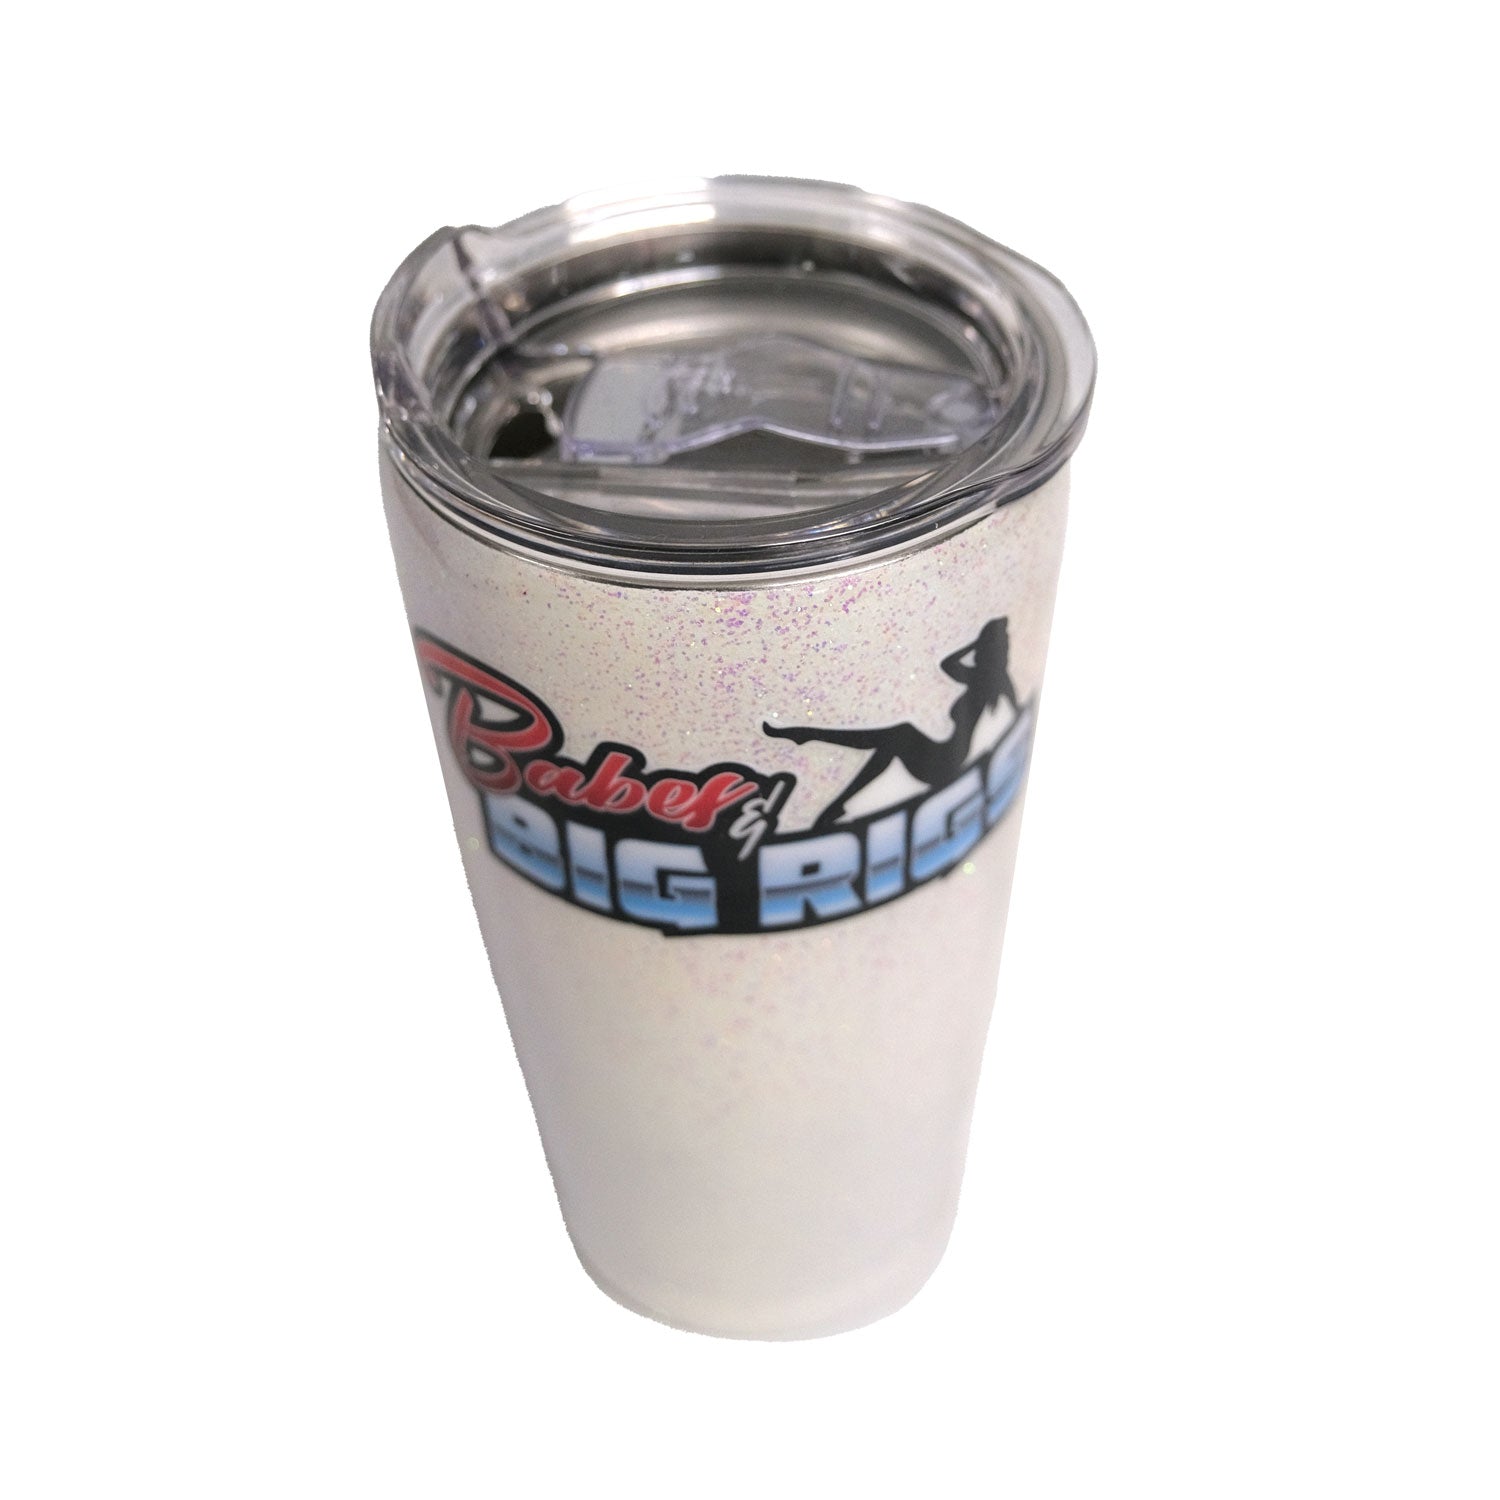 Babes and Big Rigs Logo Thermos Cup